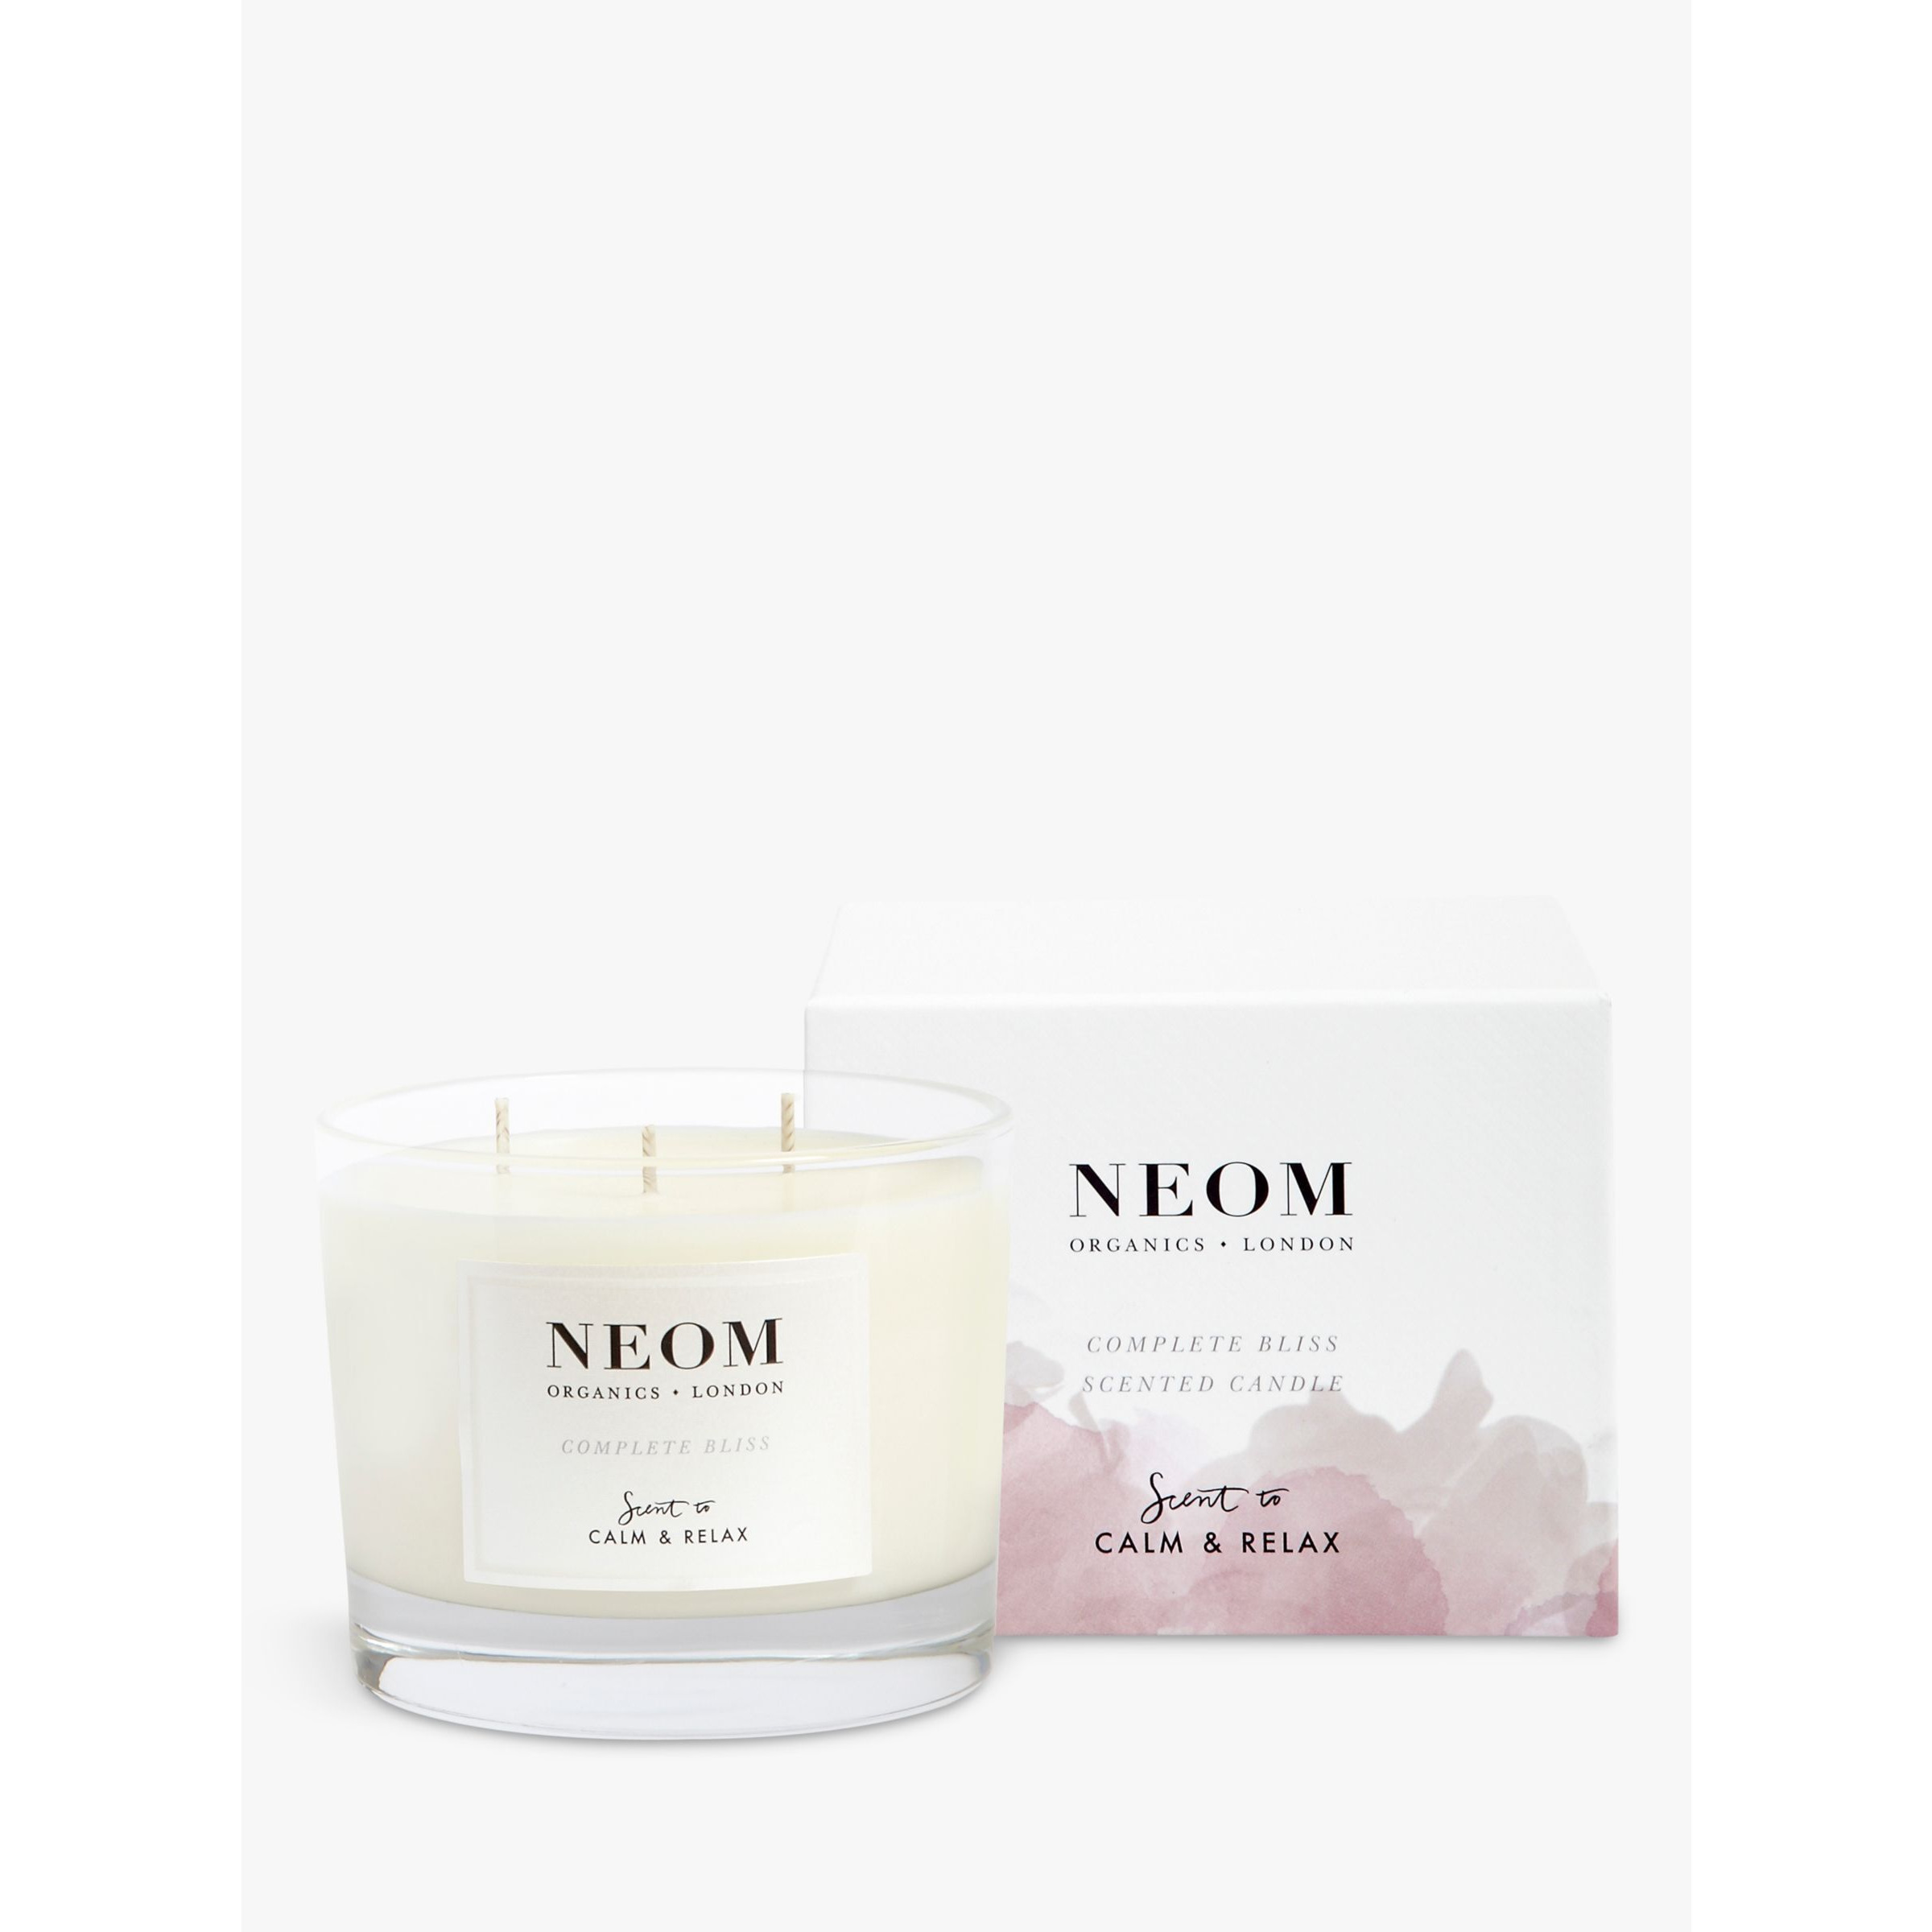 Neom Organics London Complete Bliss 3 Wick Scented Candle - image 1